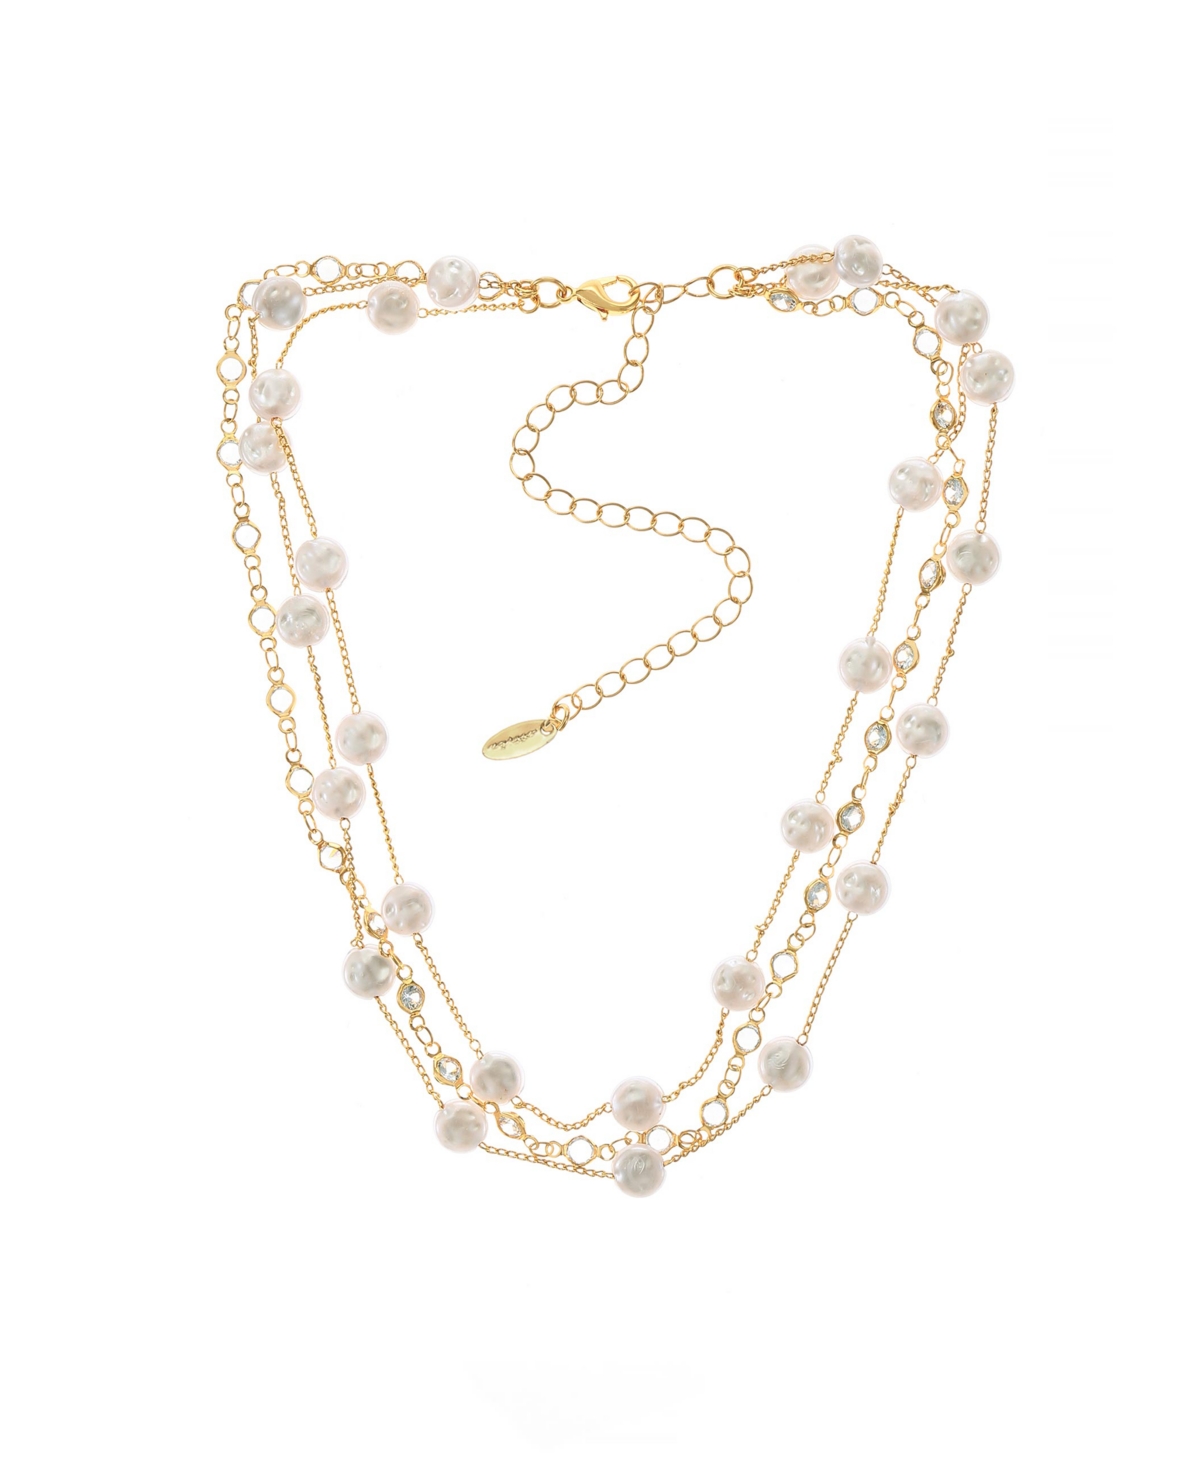 ETTIKA DRESSED IN FRESHWATER PEARLS LAYERED 18K GOLD PLATED NECKLACE